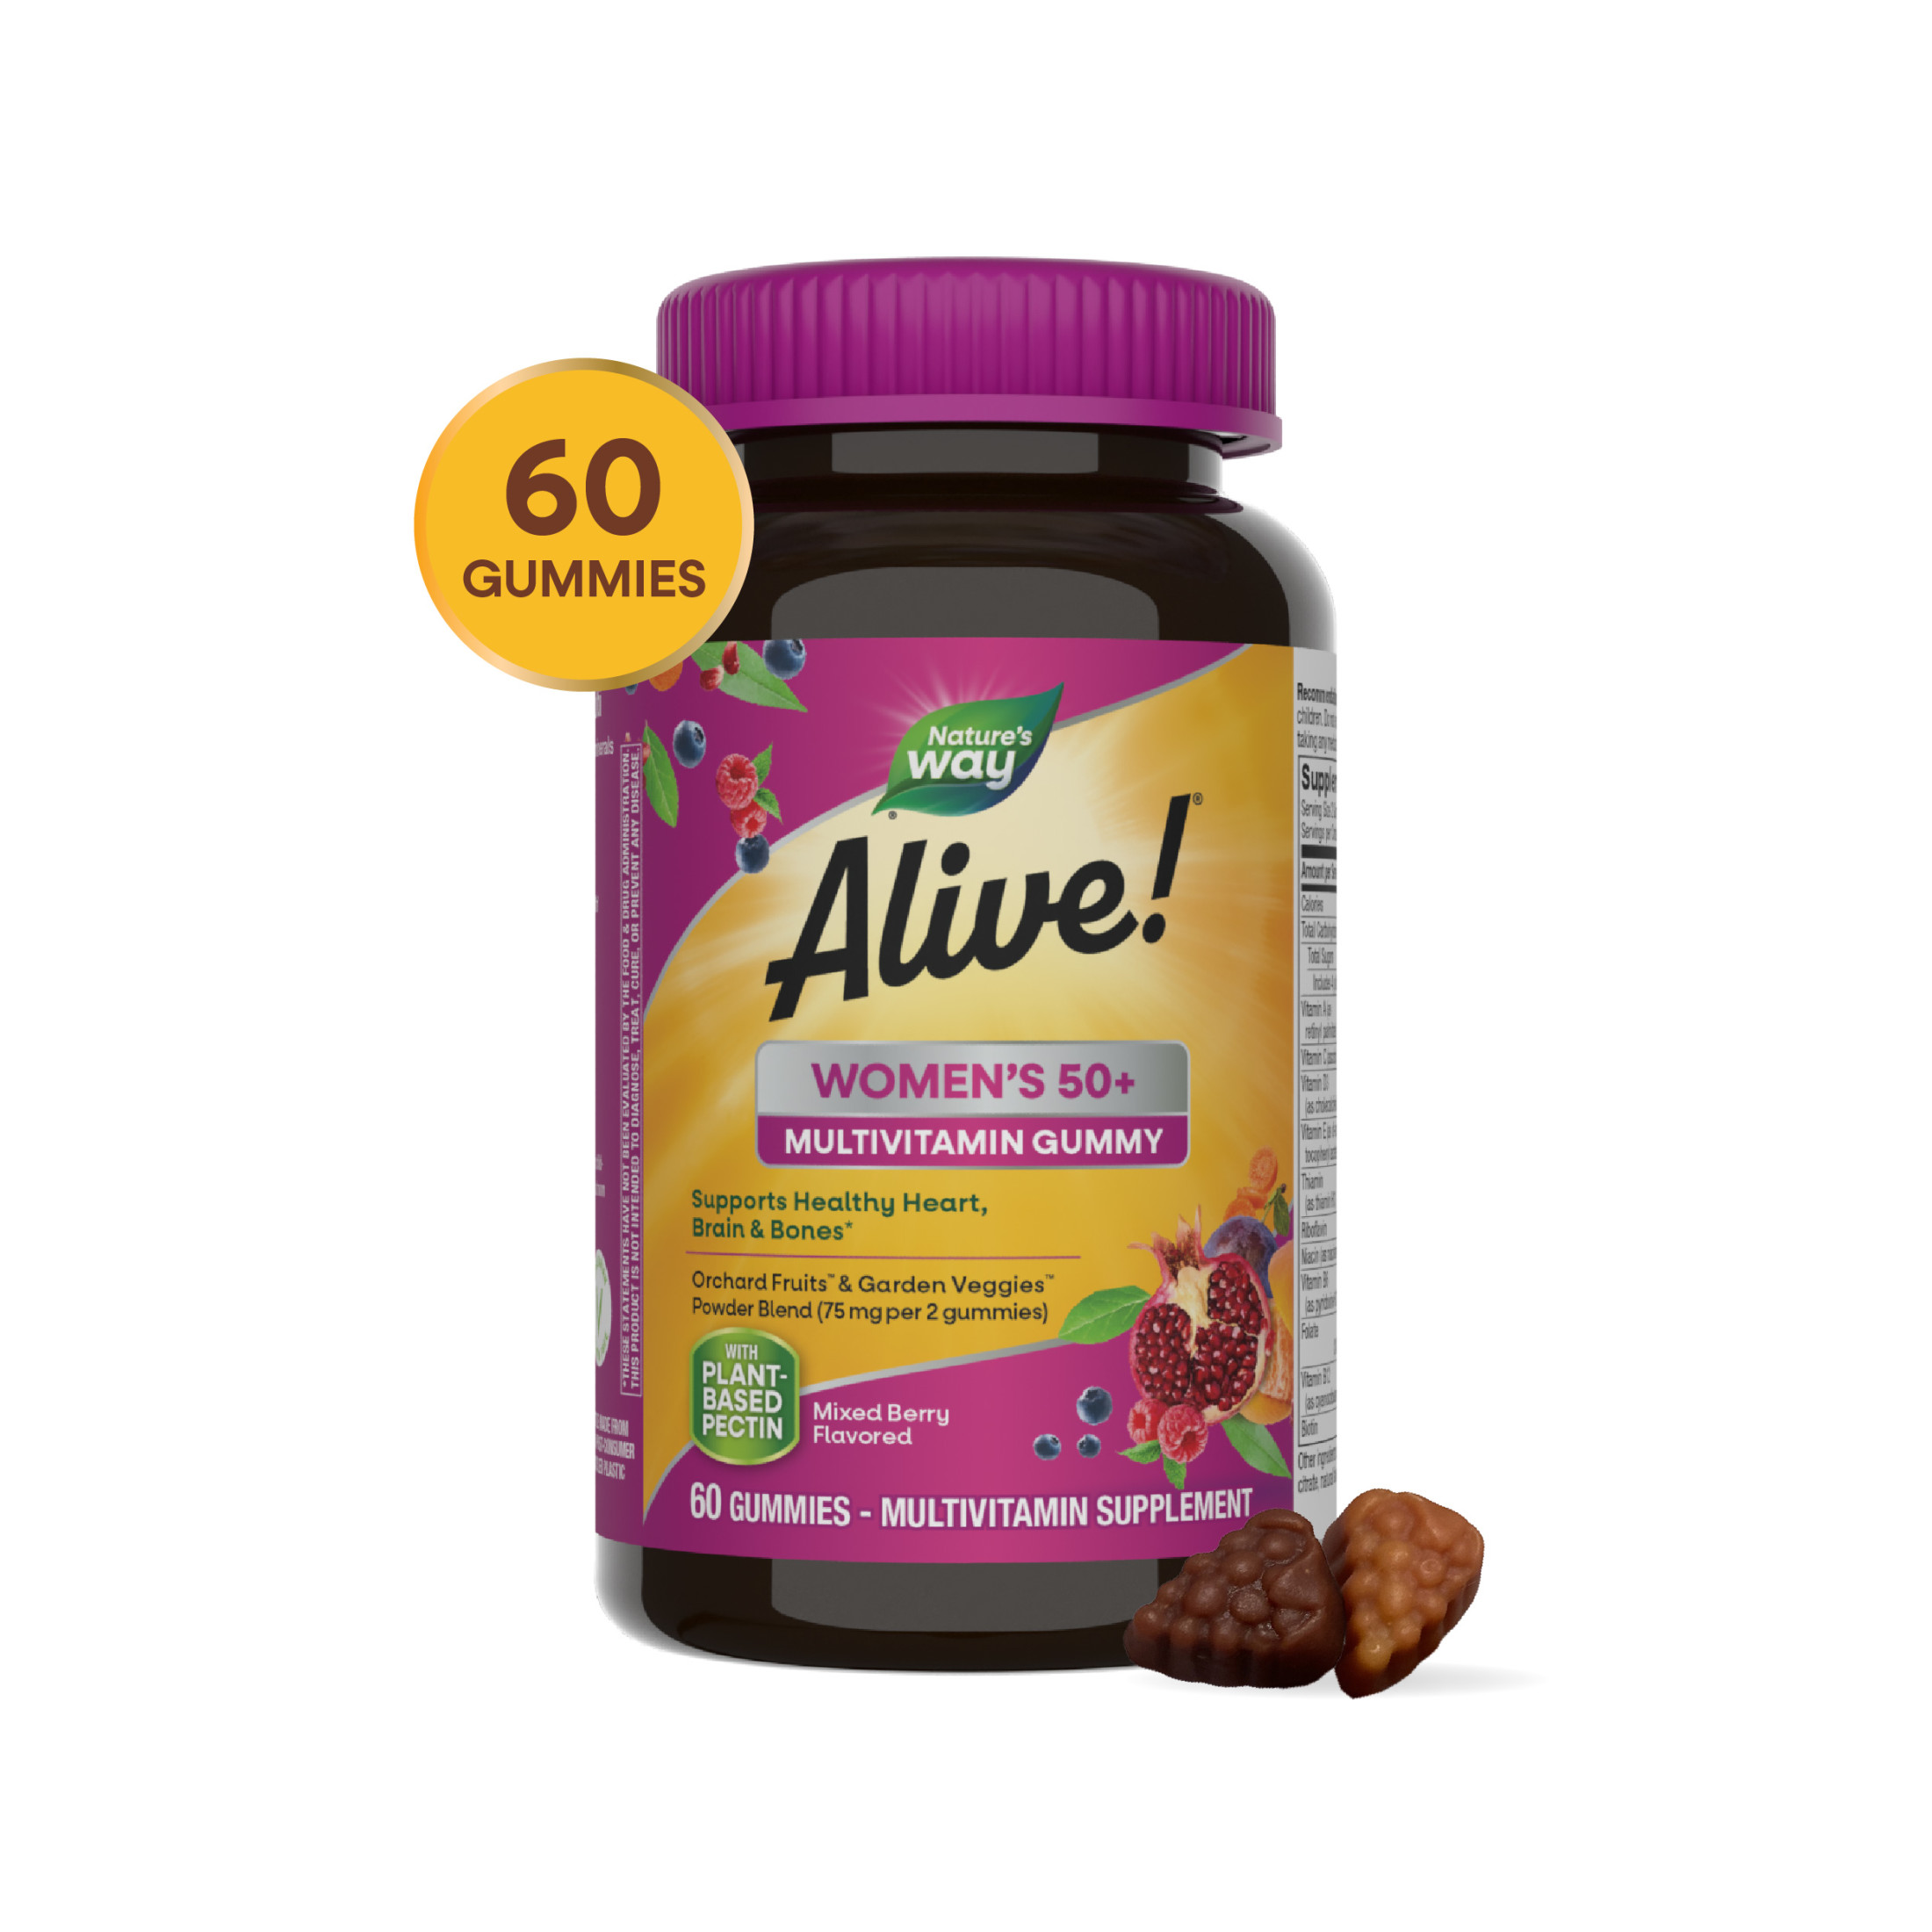 Nature's Way Alive! Women's 50+ Gummy Multivitamin, B-Vitamins, Mixed Berry Flavored, 60 Count - image 3 of 9